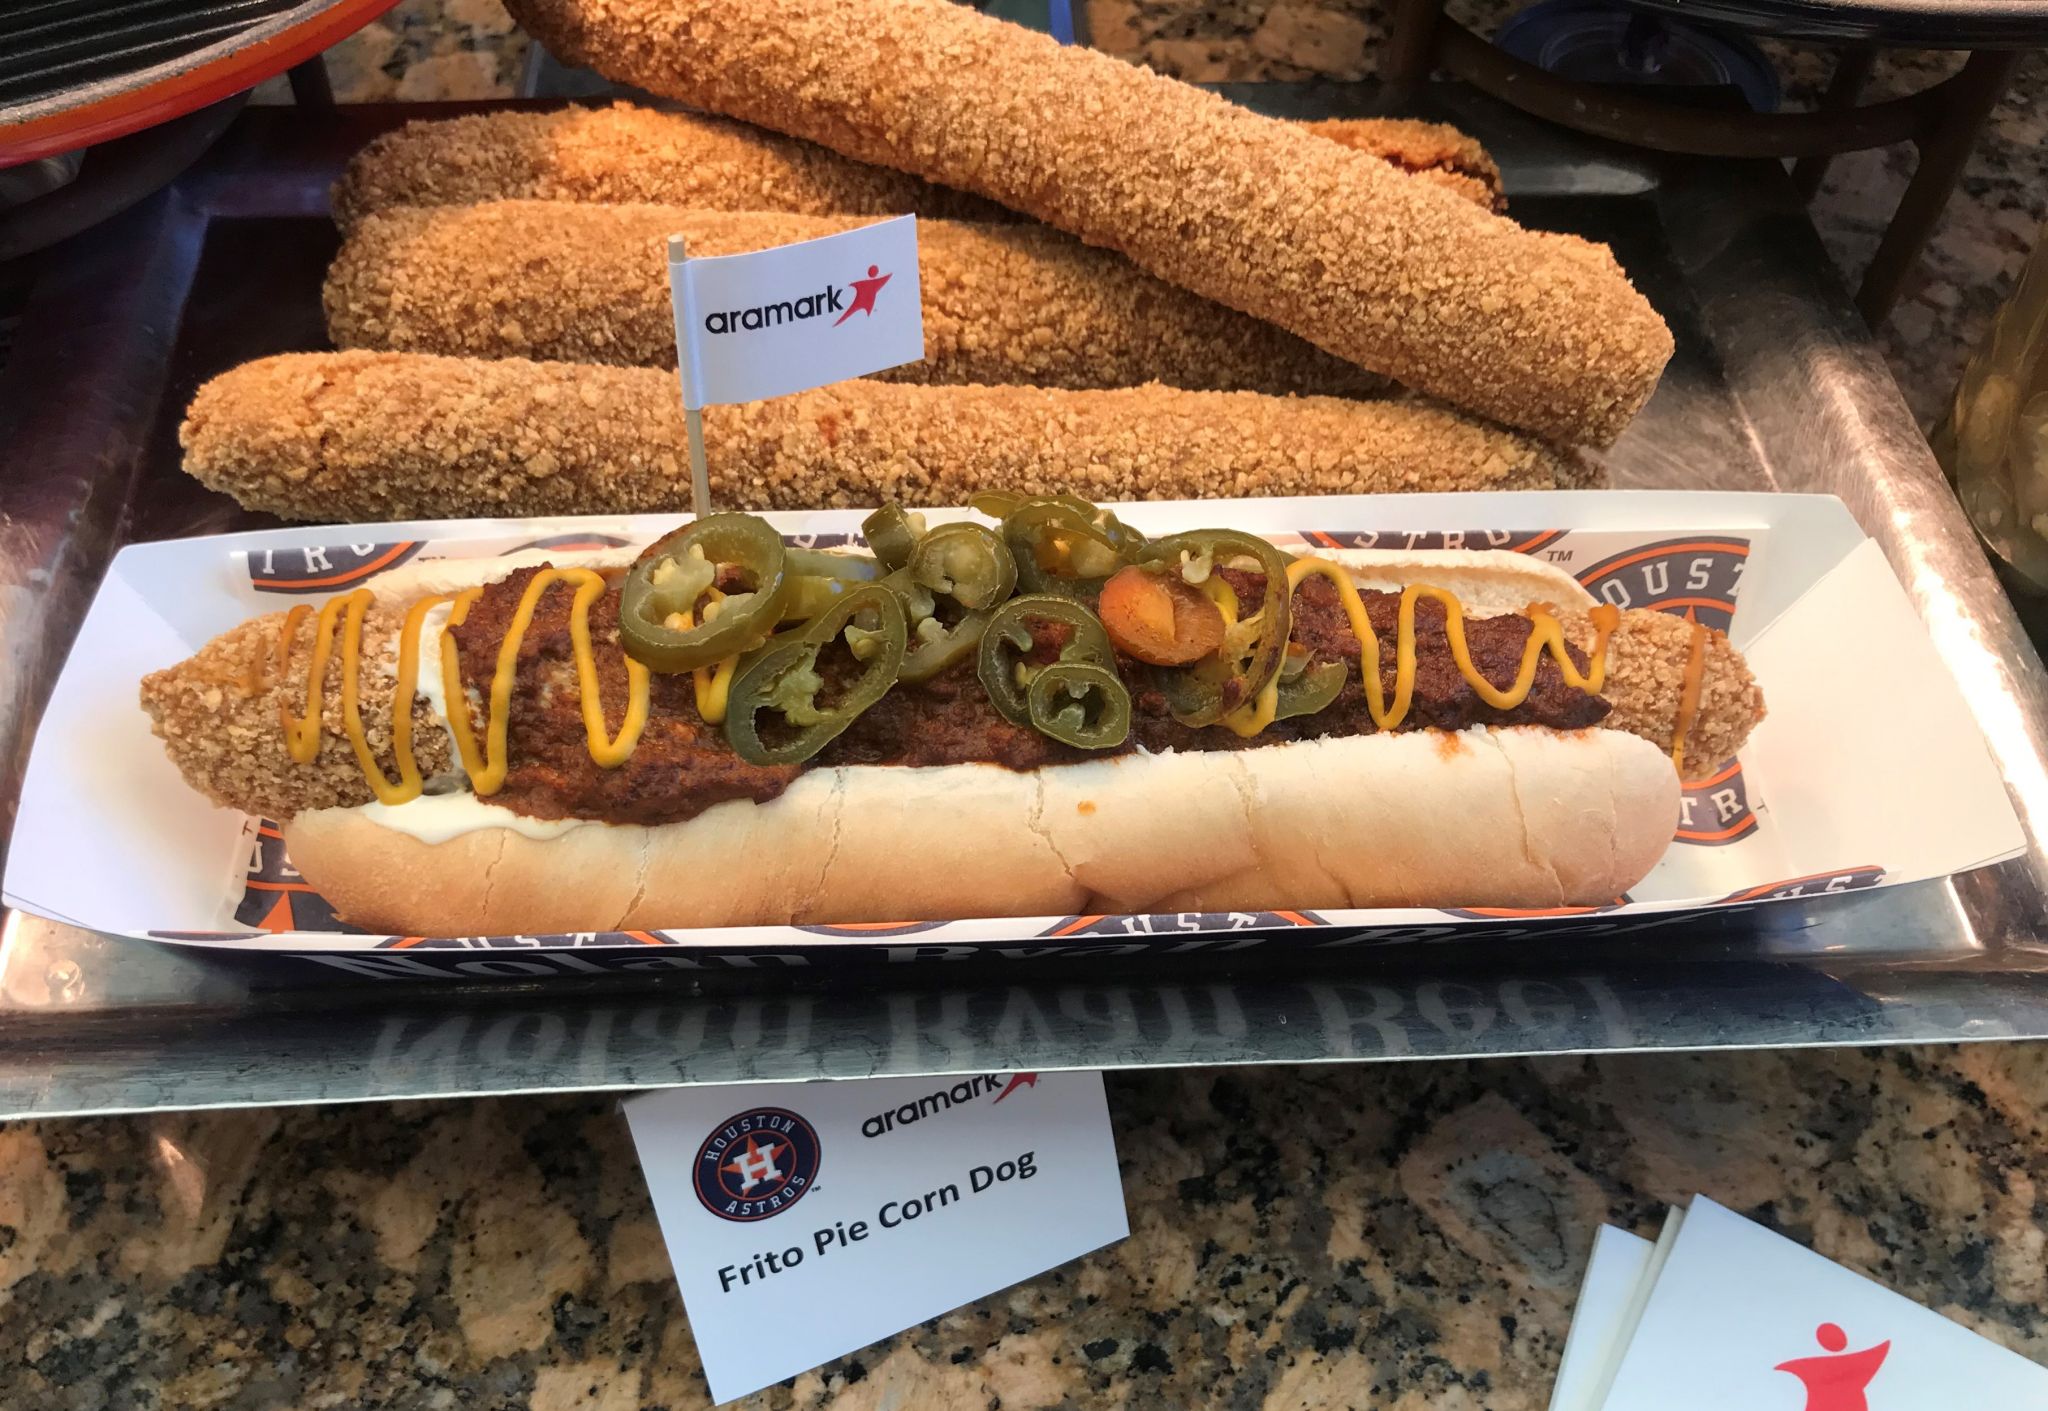 The Boomstick Dog for sale at the WS : r/baseball